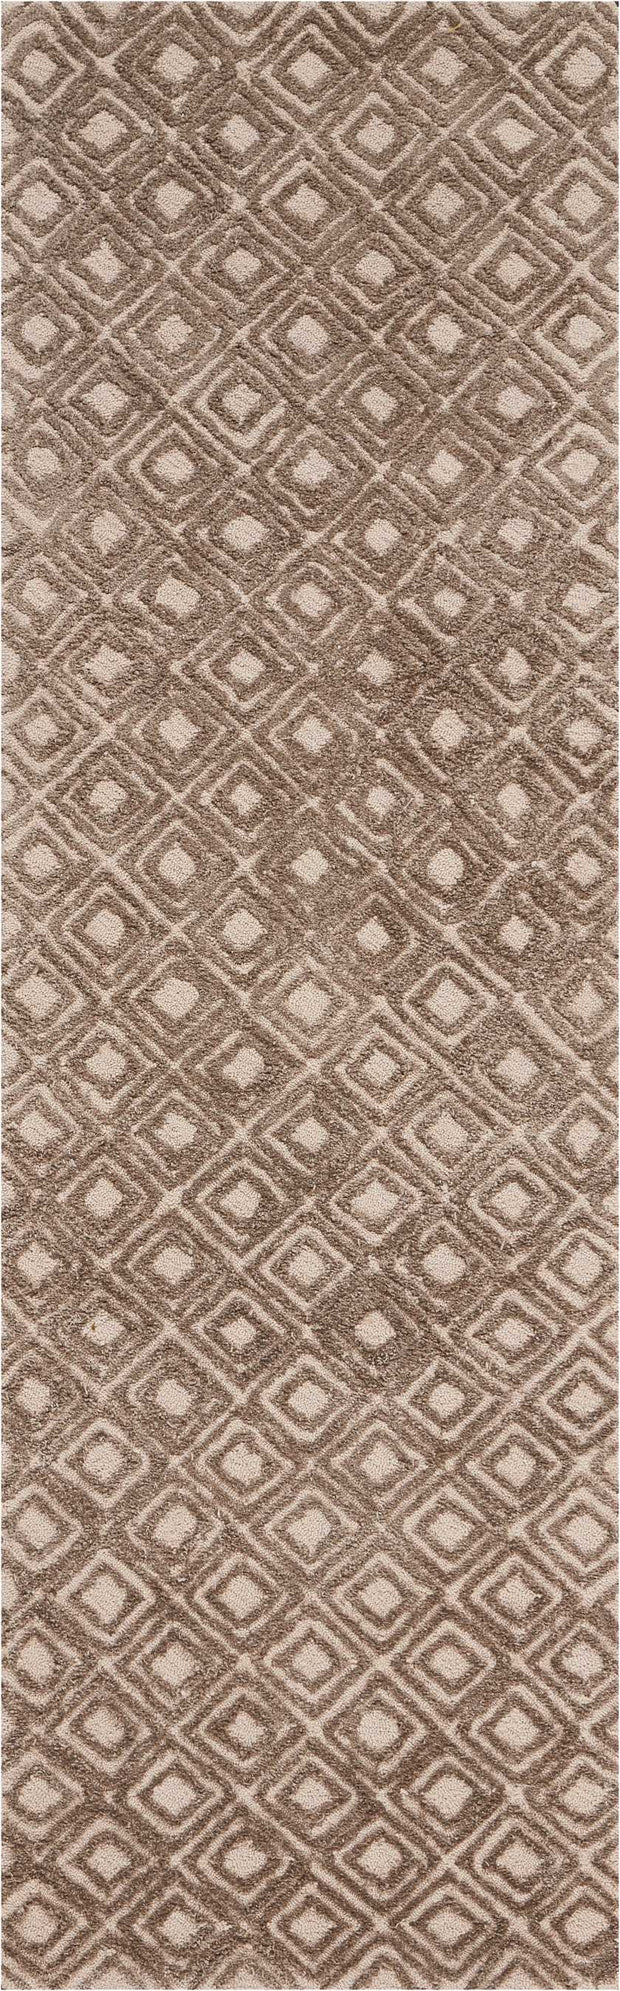 deco mod hand tufted taupe rug by nourison nsn 099446398031 2